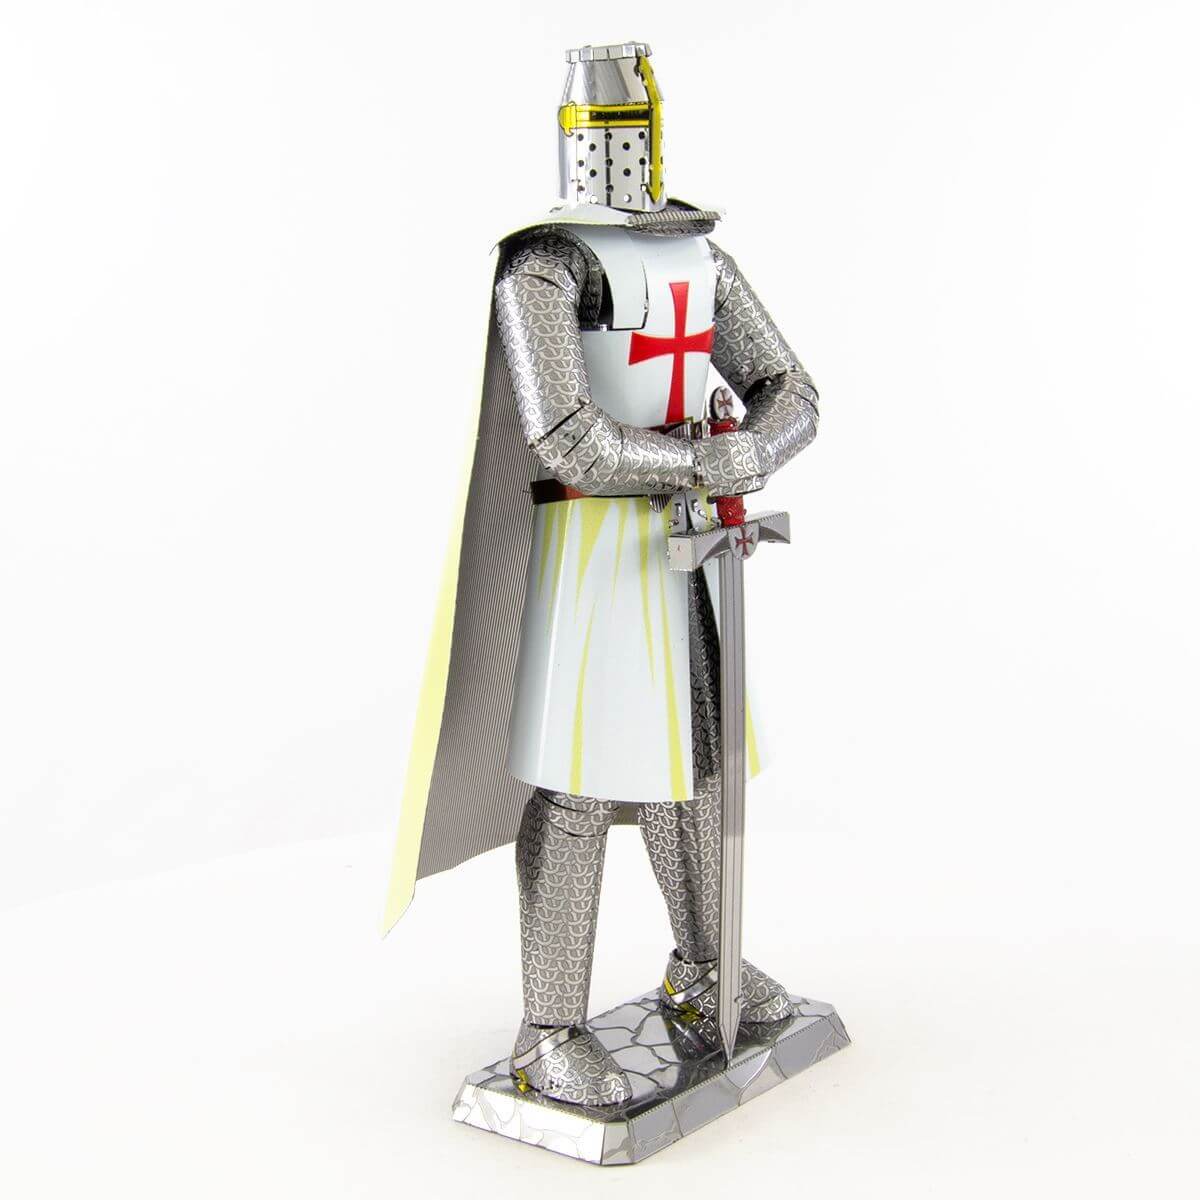 Front view of the templar knight.